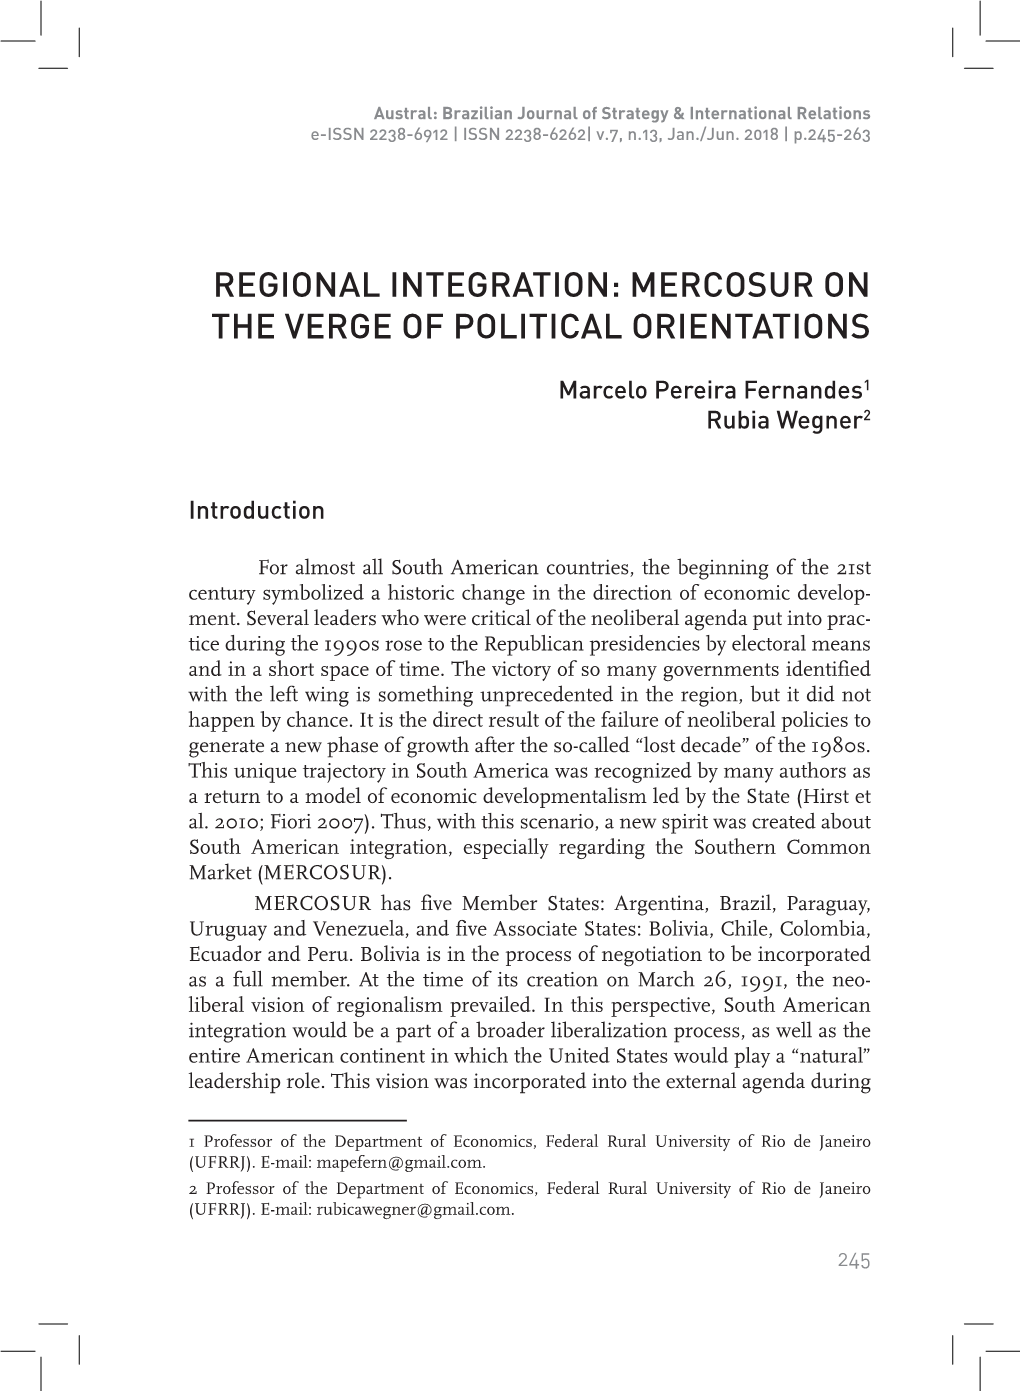 Regional Integration: Mercosur on the Verge of Political Orientations